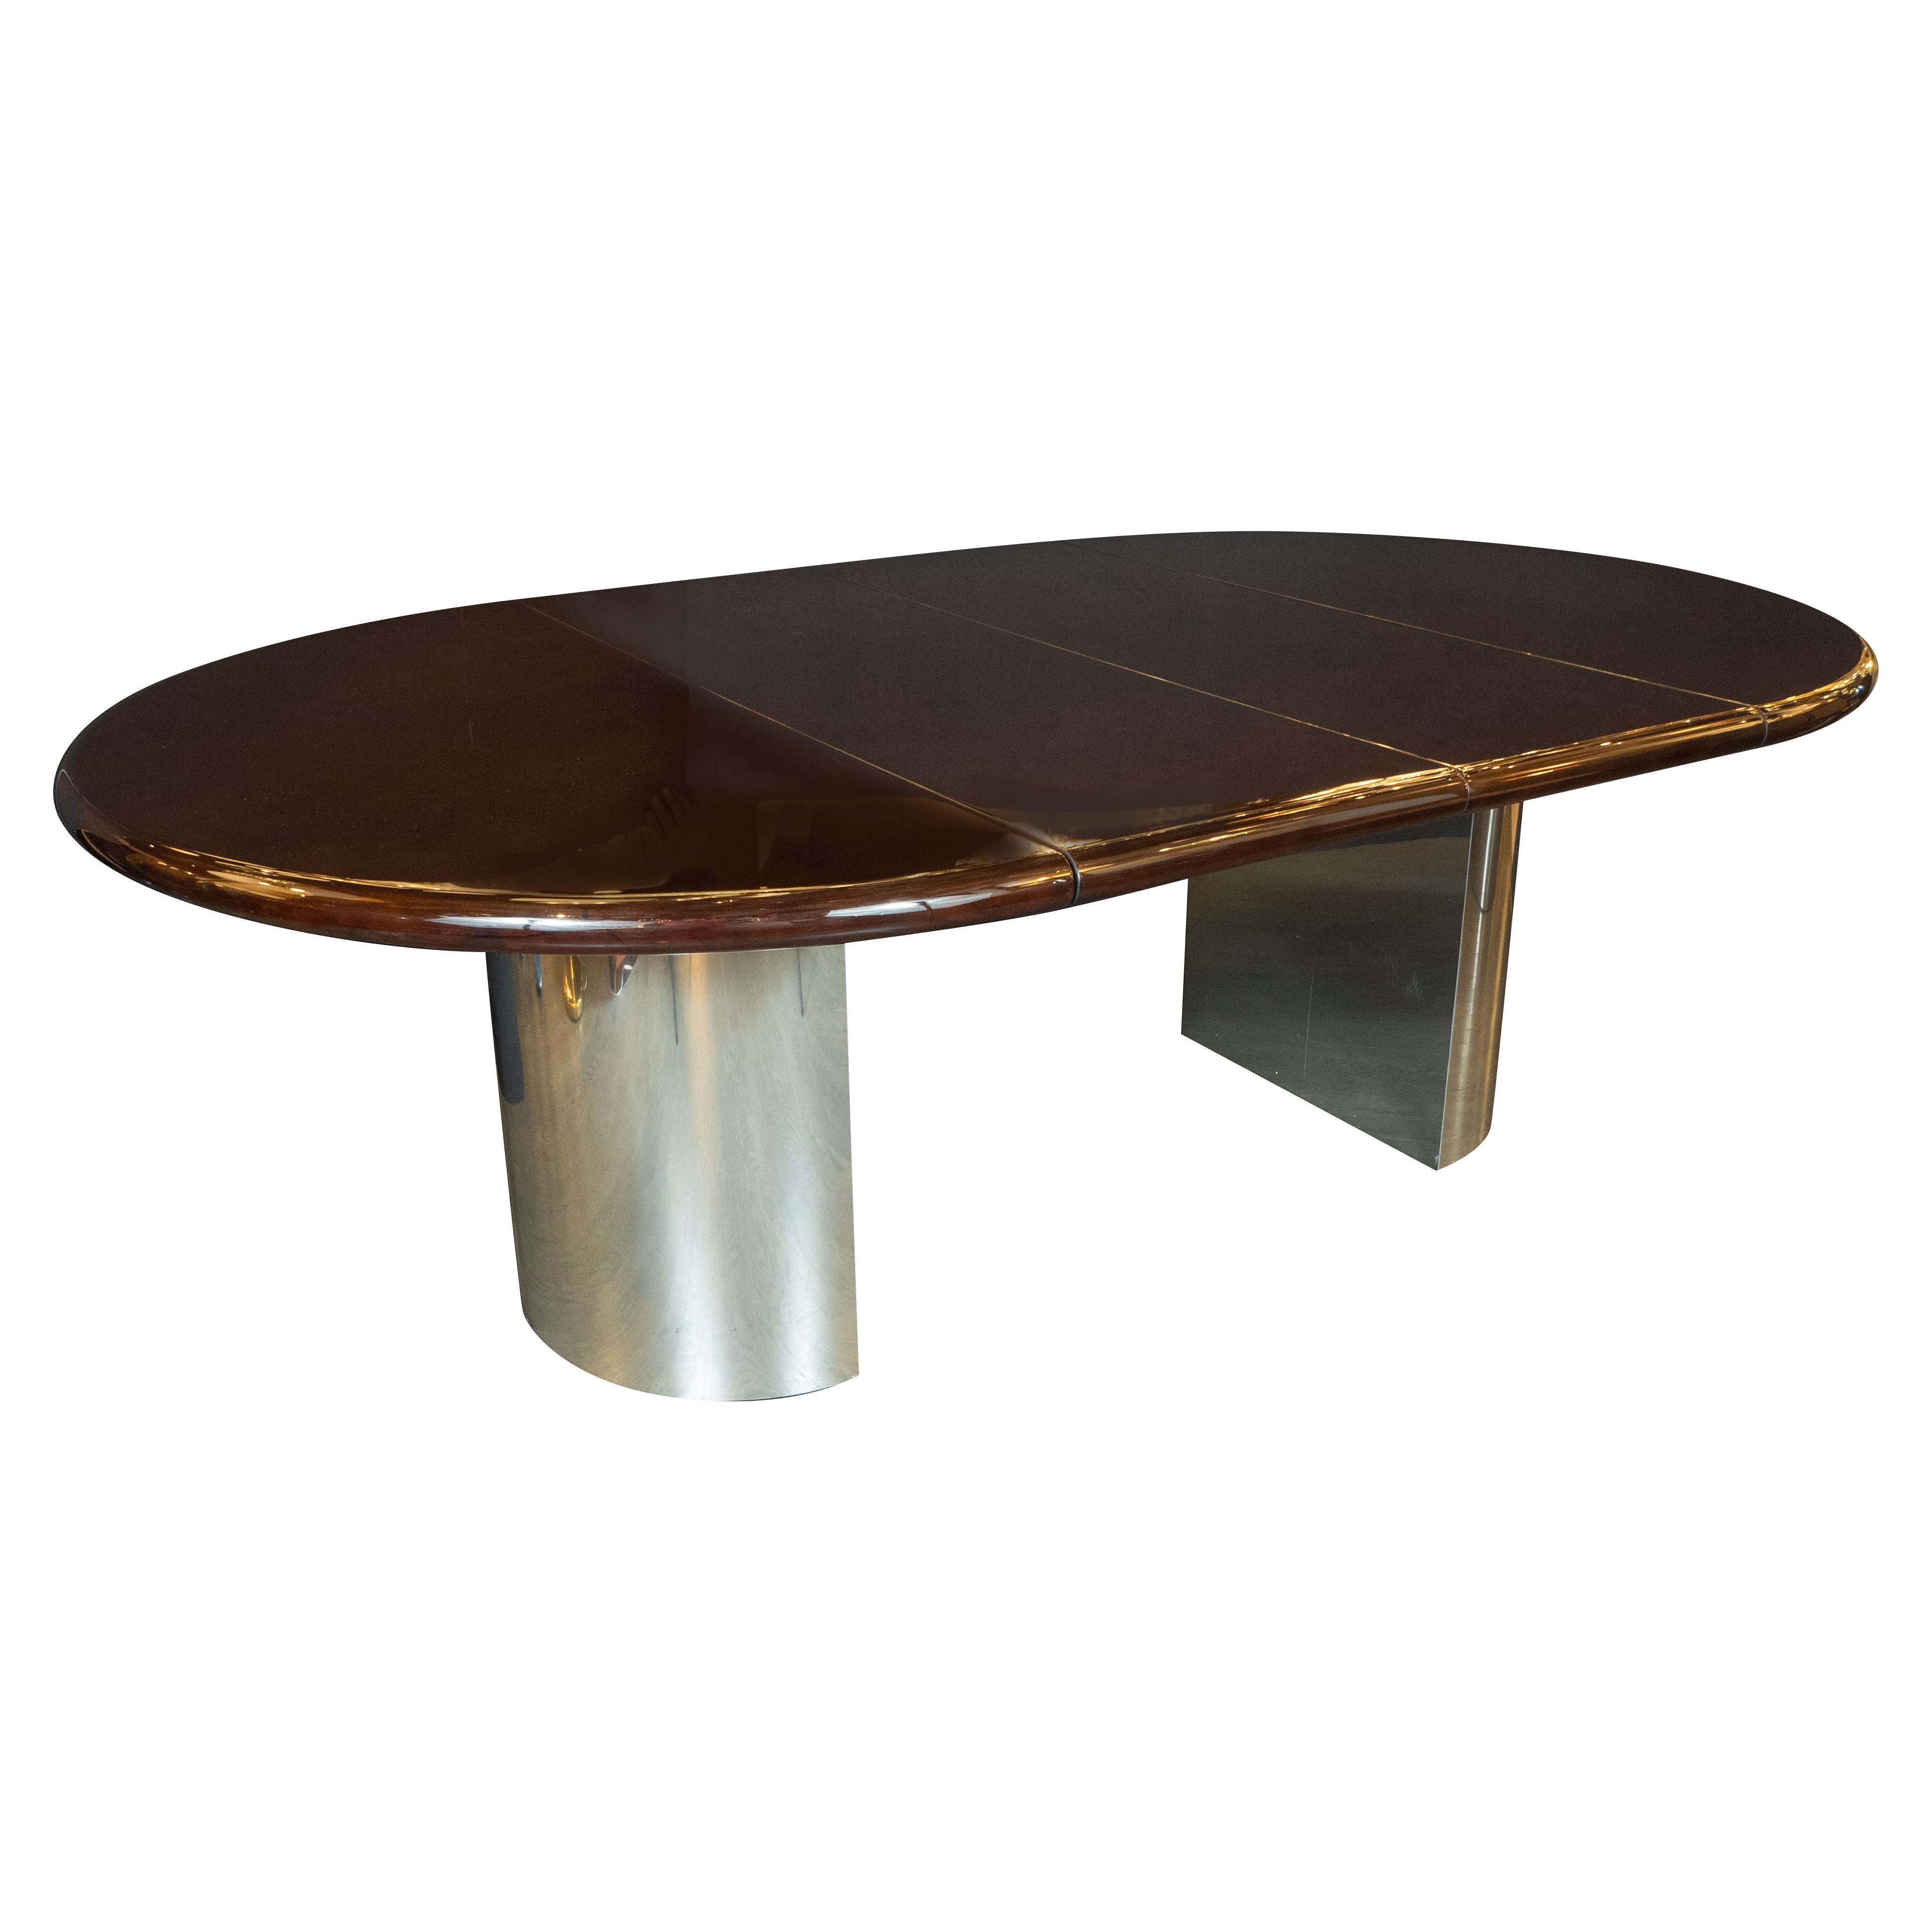 This magnificent Mid-Century Modern dining table was realized by the esteemed American maker, Directional in the United States, circa 1970. It features two demilune form curved feet in polished chrome that support a circular walnut tabletop. The